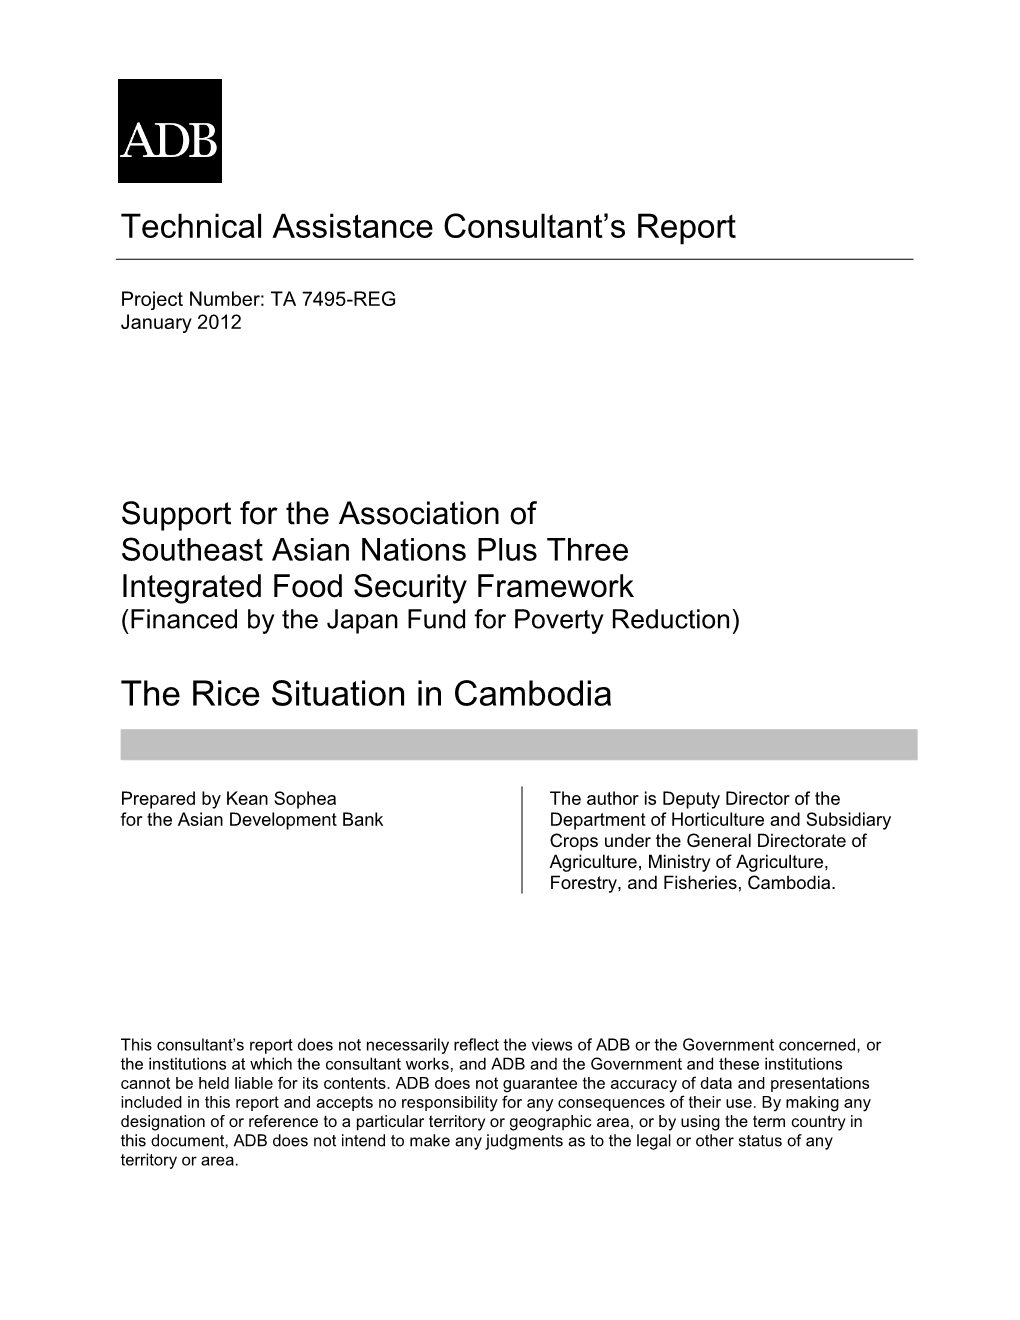 TACR: Regional: the Rice Situation in Cambodia